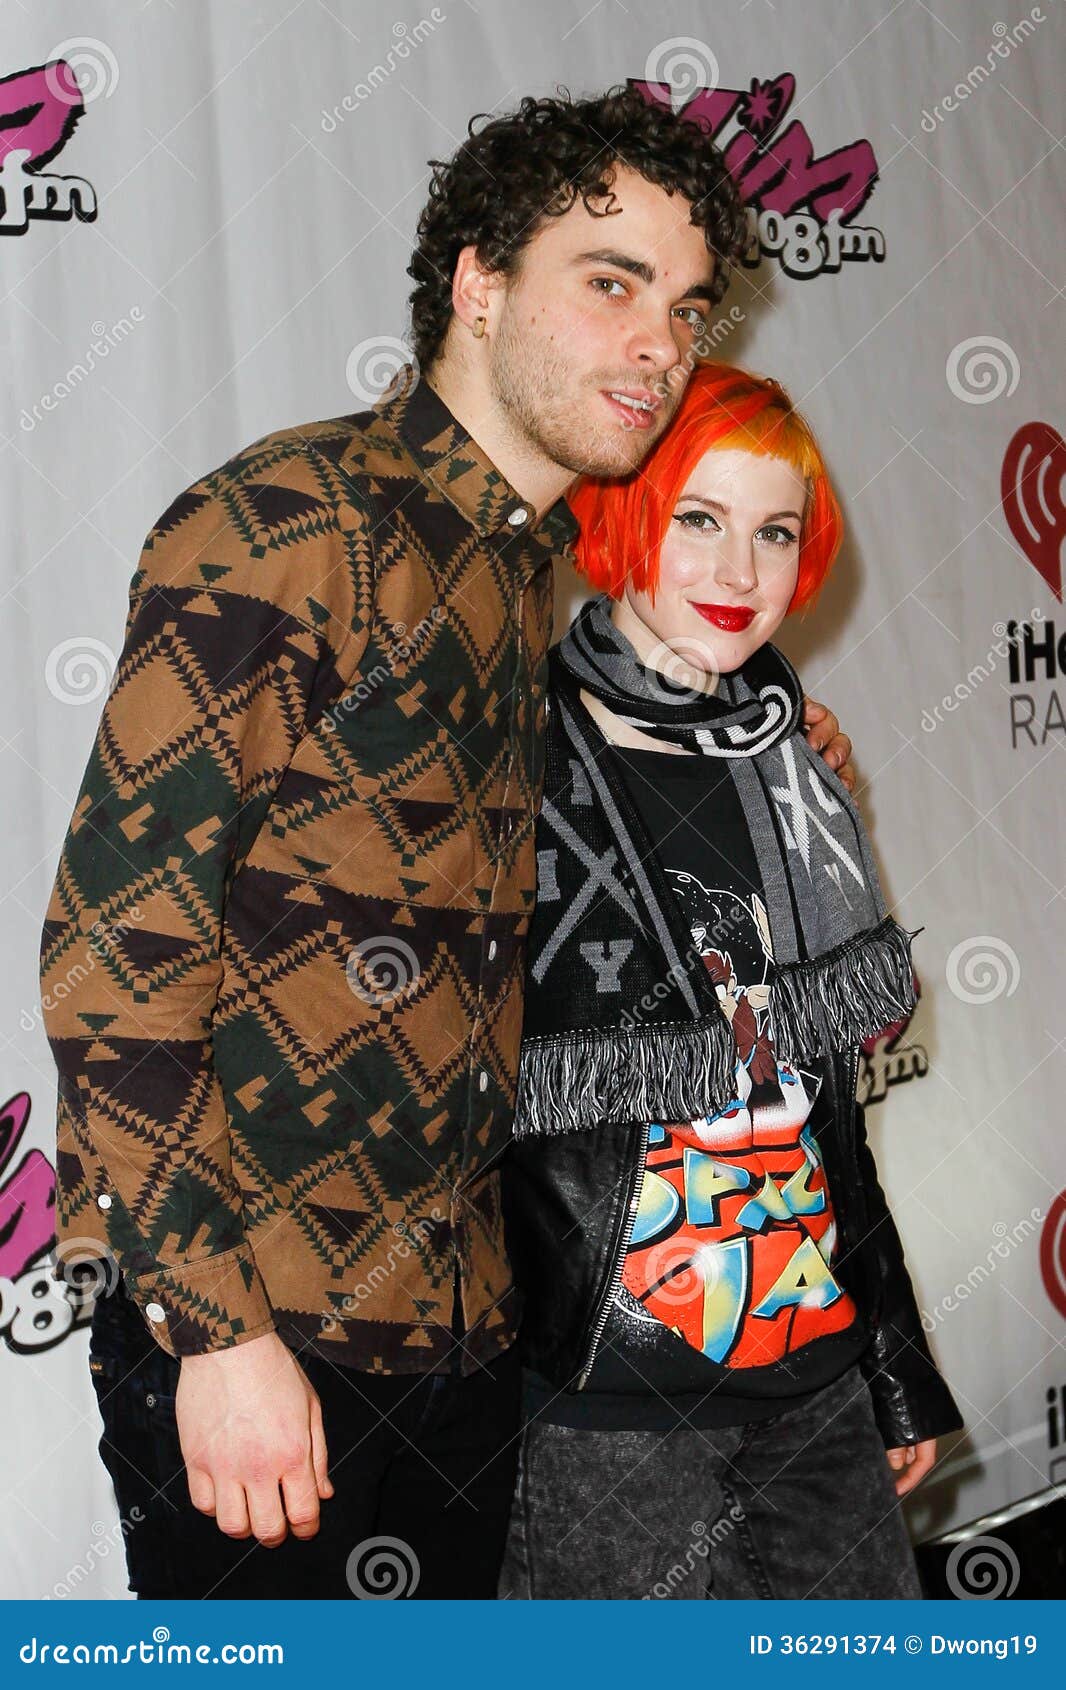 Hayley who dating is williams Hayley Williams